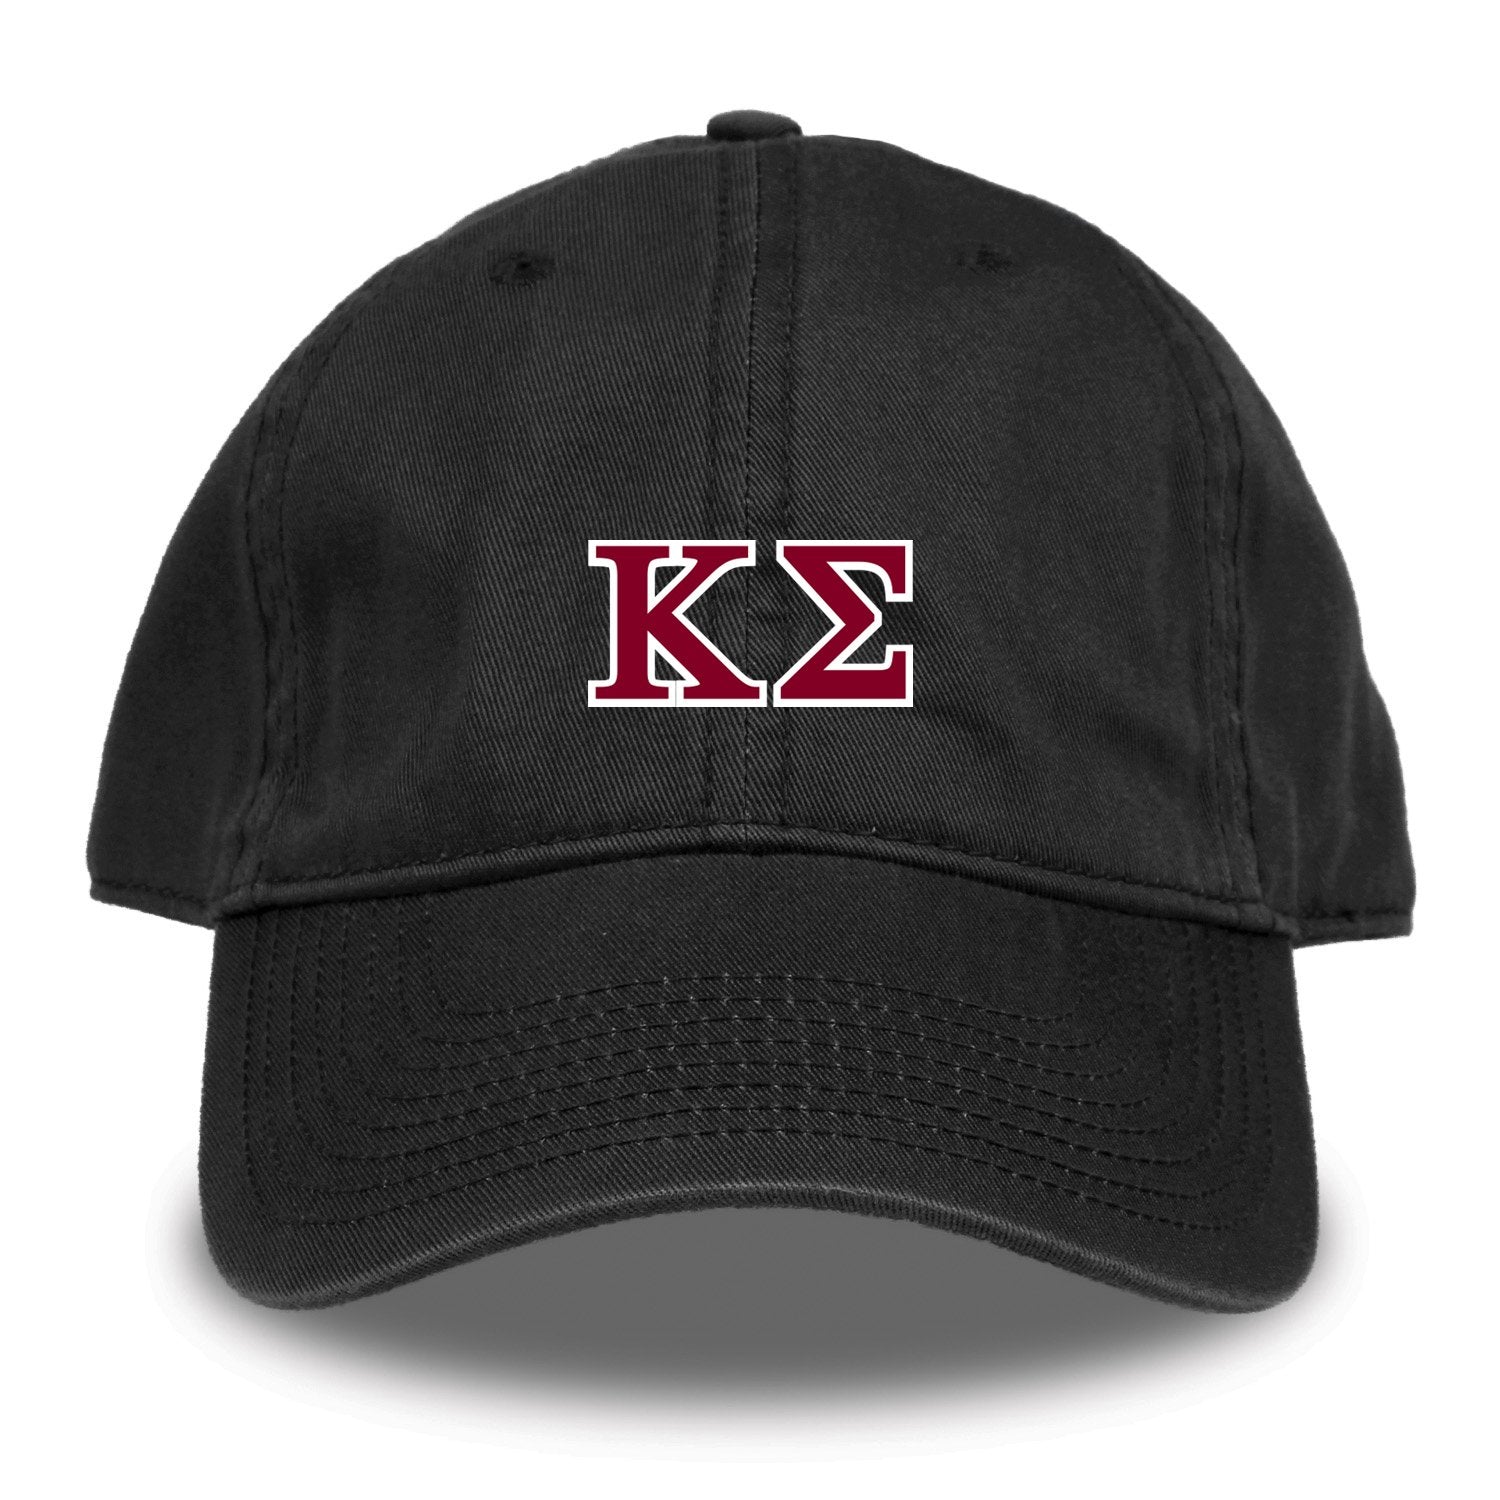 Kappa Sig Black Hat by The Game – Kappa Sigma Official Store